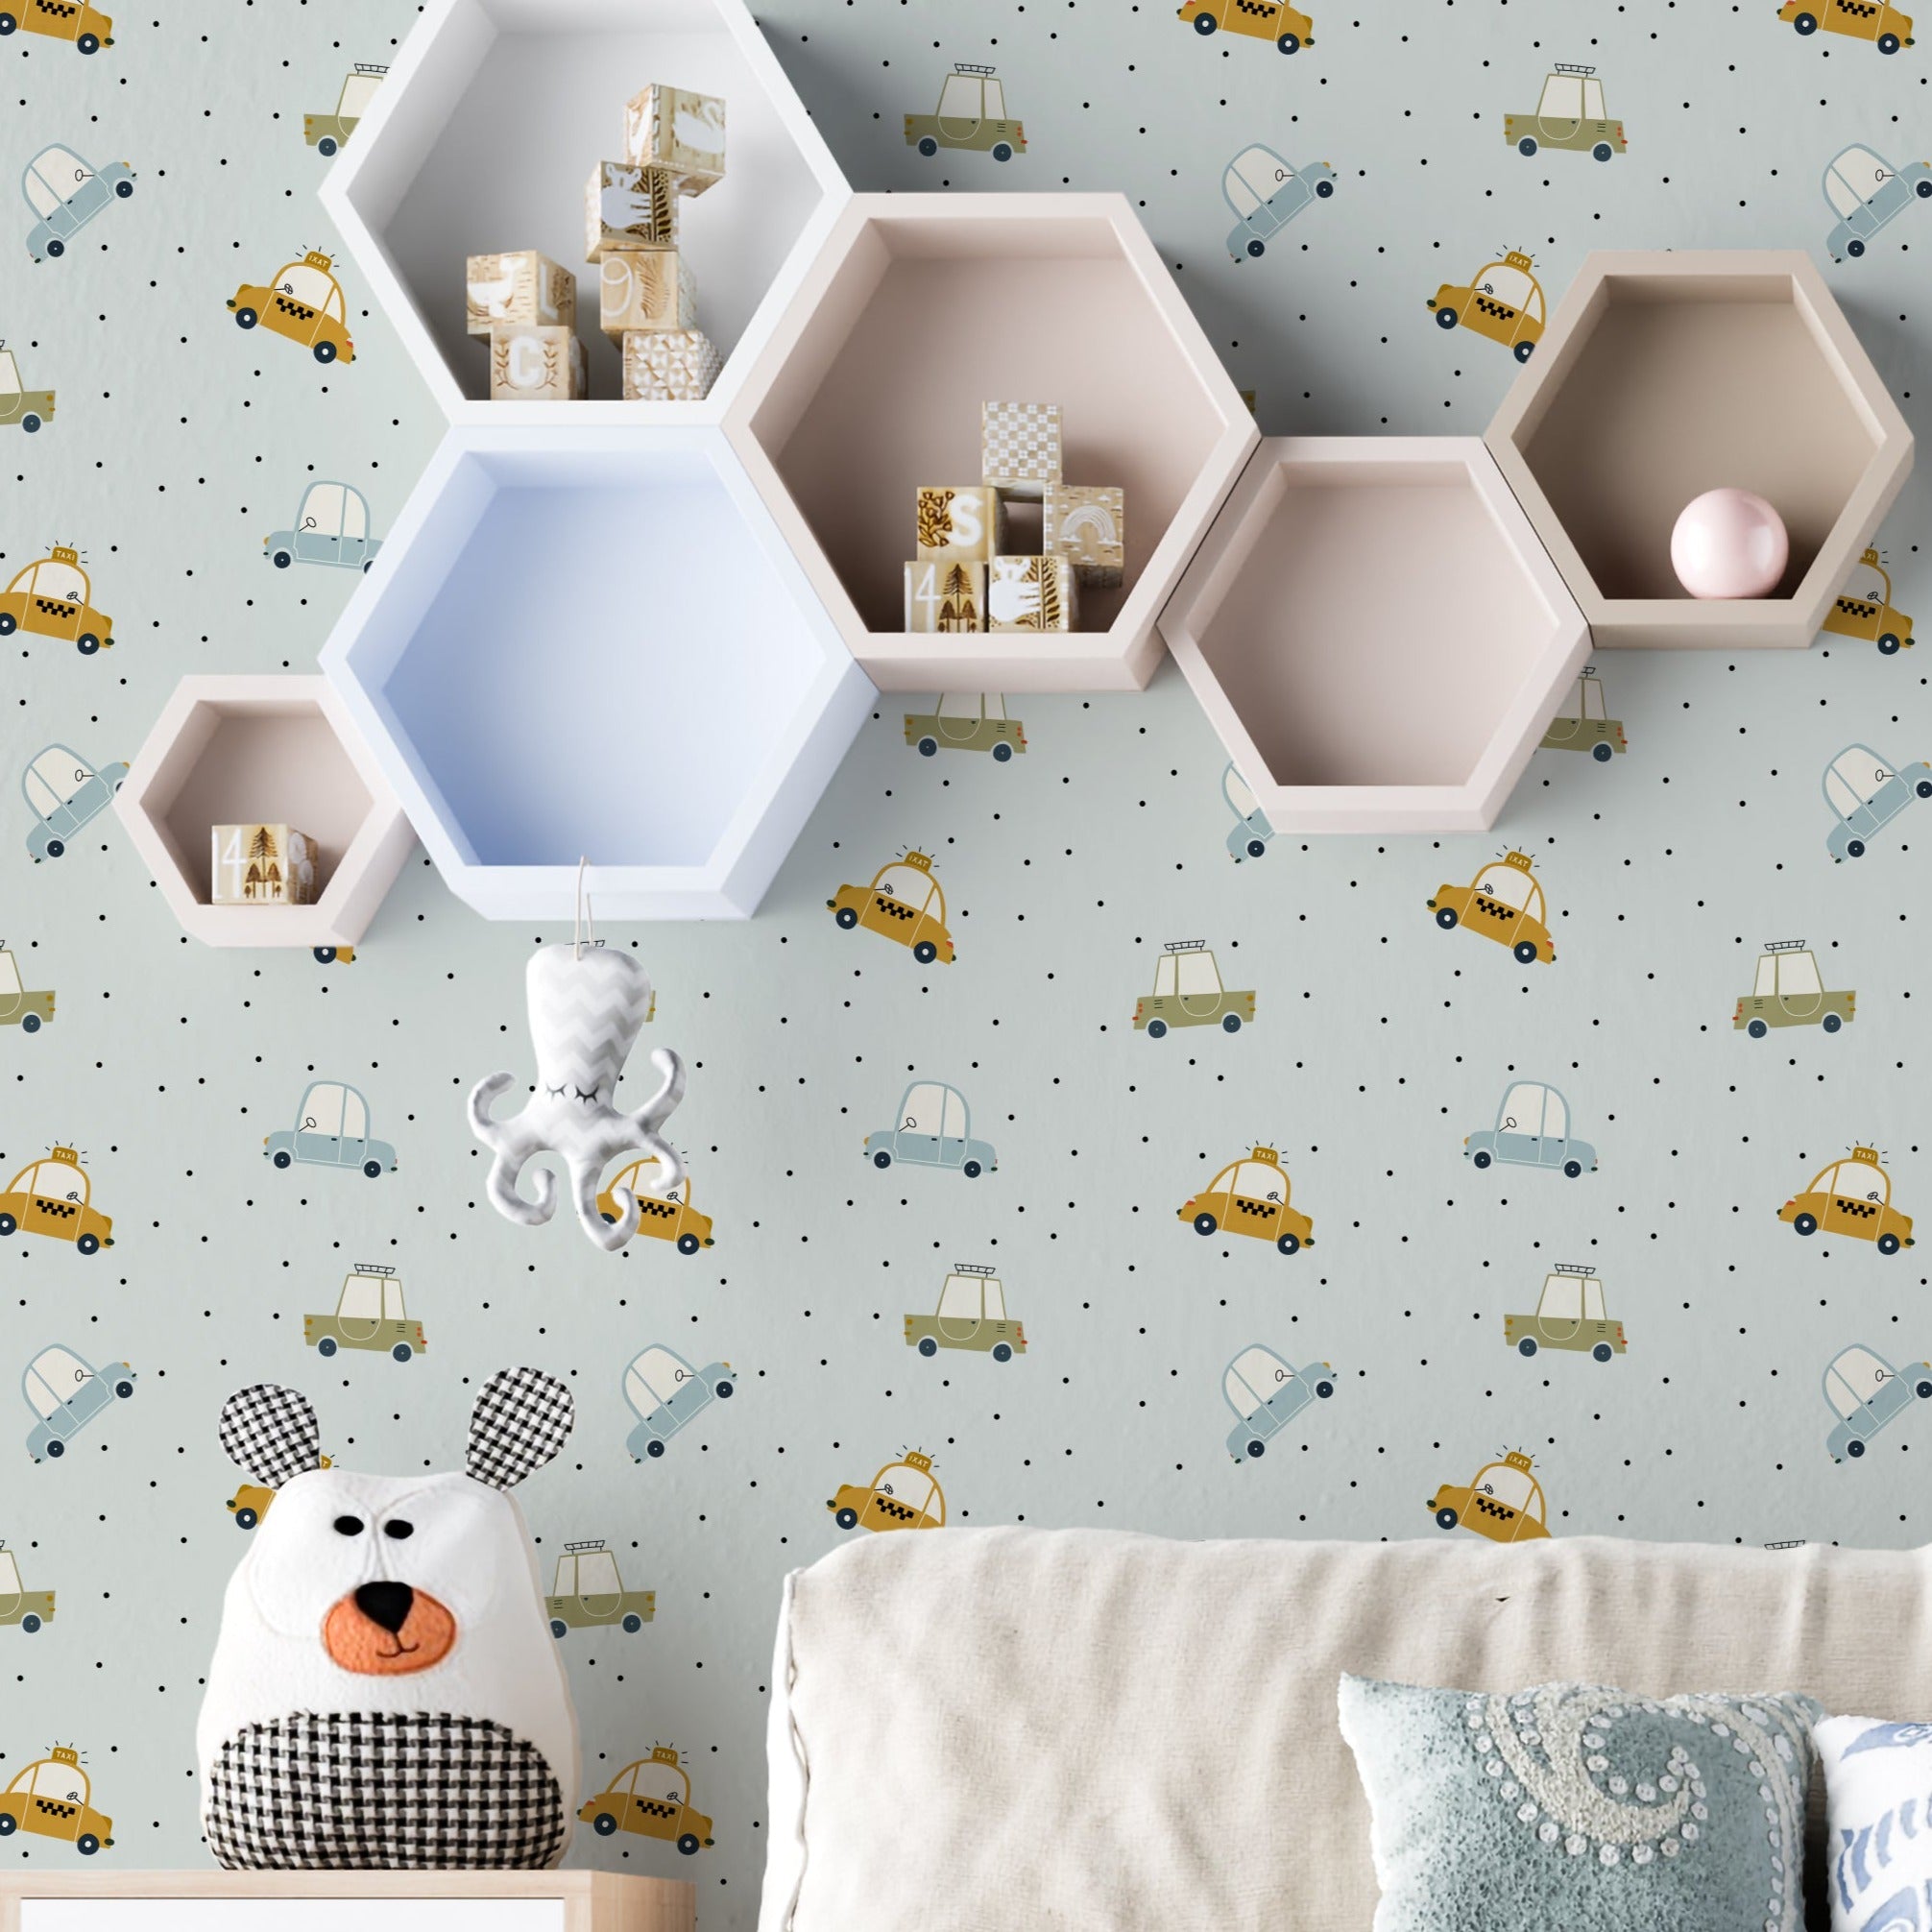 A cozy children's room setting showcasing the Cute Cars Wallpaper, with cheerful blue and yellow cars scattered across a dotted gray backdrop. The playful theme complements the room's decor, including a stuffed bear, wooden toys, and a modern, child-friendly furniture setup